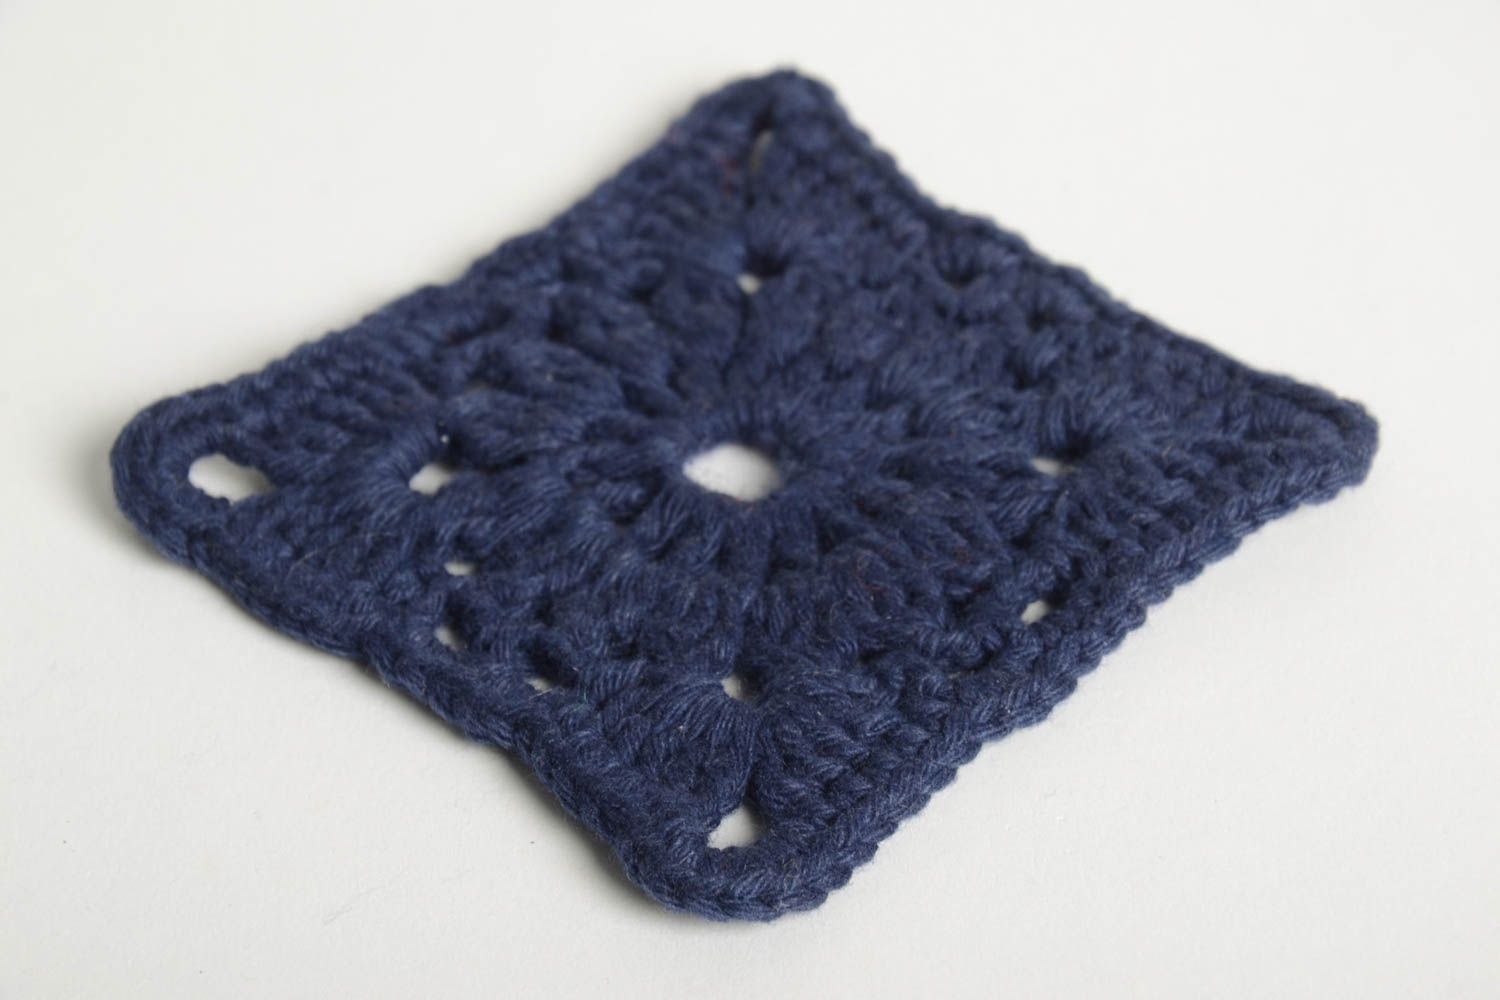 Unusual handmade crochet lace coaster hot pads kitchen supplies small gifts photo 5